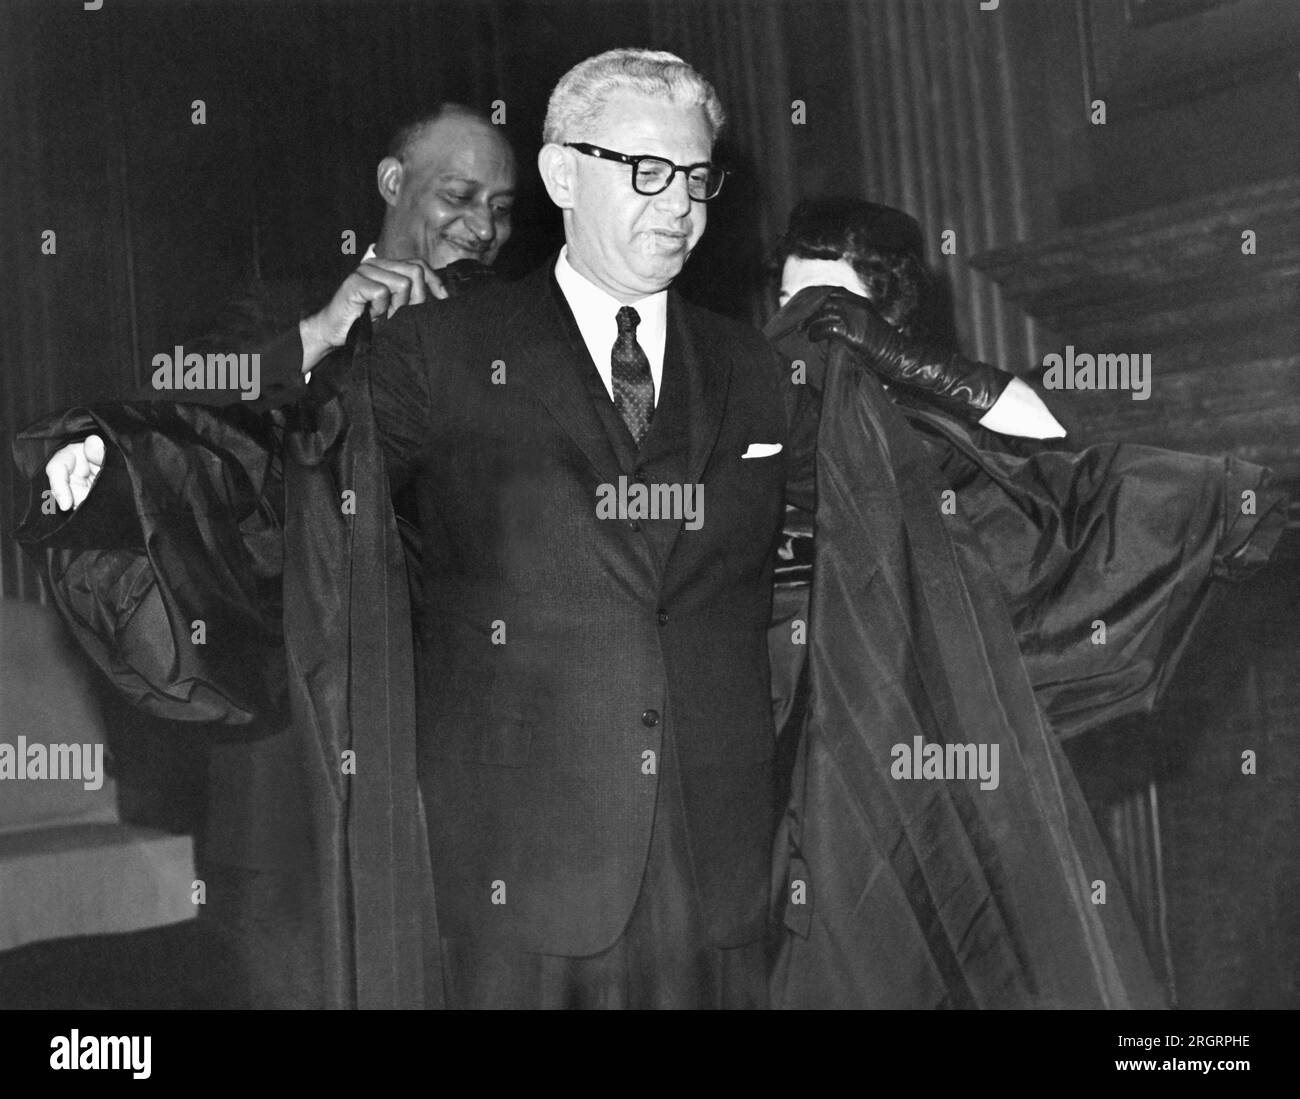 Washington, D.C.:  October 1, 1962 Former Labor Secretary Arthur J. Goldberg gets an assist with his robes as he prepares to get sworn in as the replacement for Justice Felix Frankfurter on the U.S. Supreme Court. Stock Photo